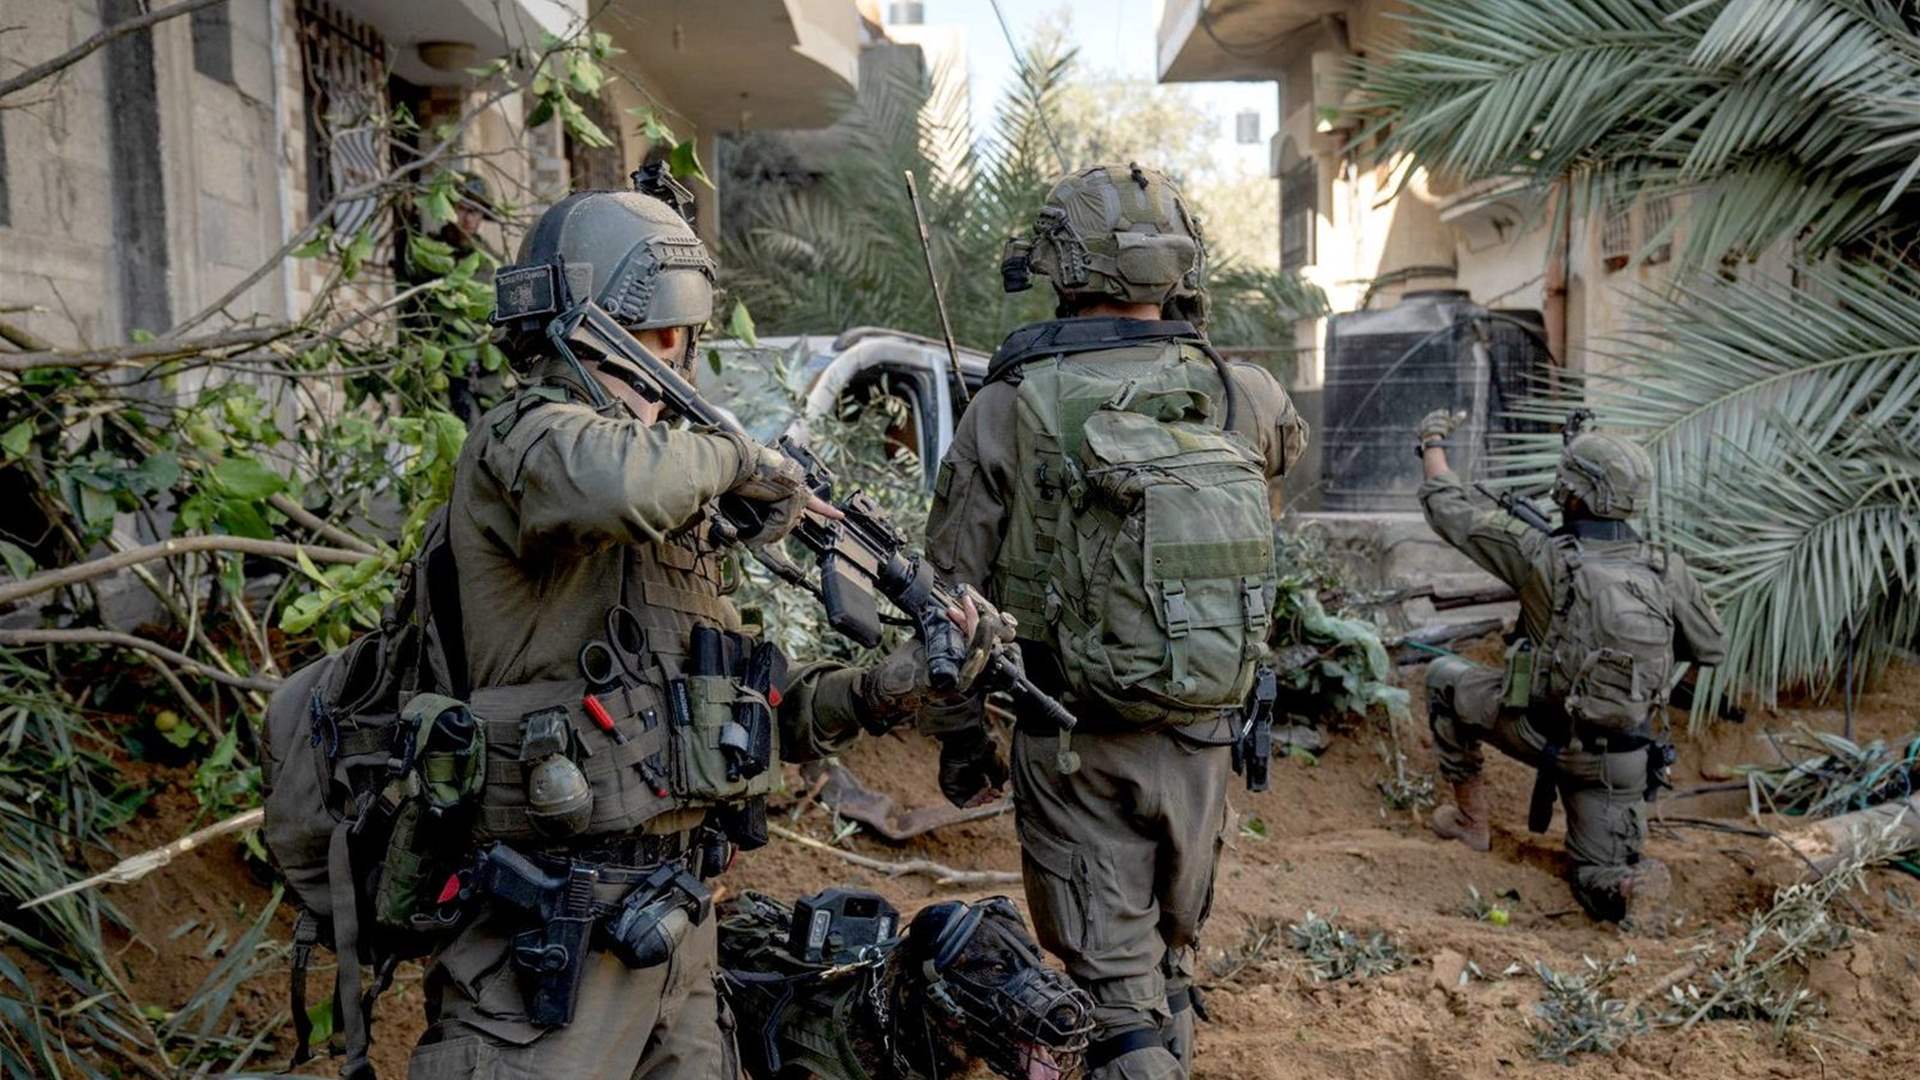 Health Ministry official: 14 Palestinians killed in Israeli attacks west of Khan Yunis 